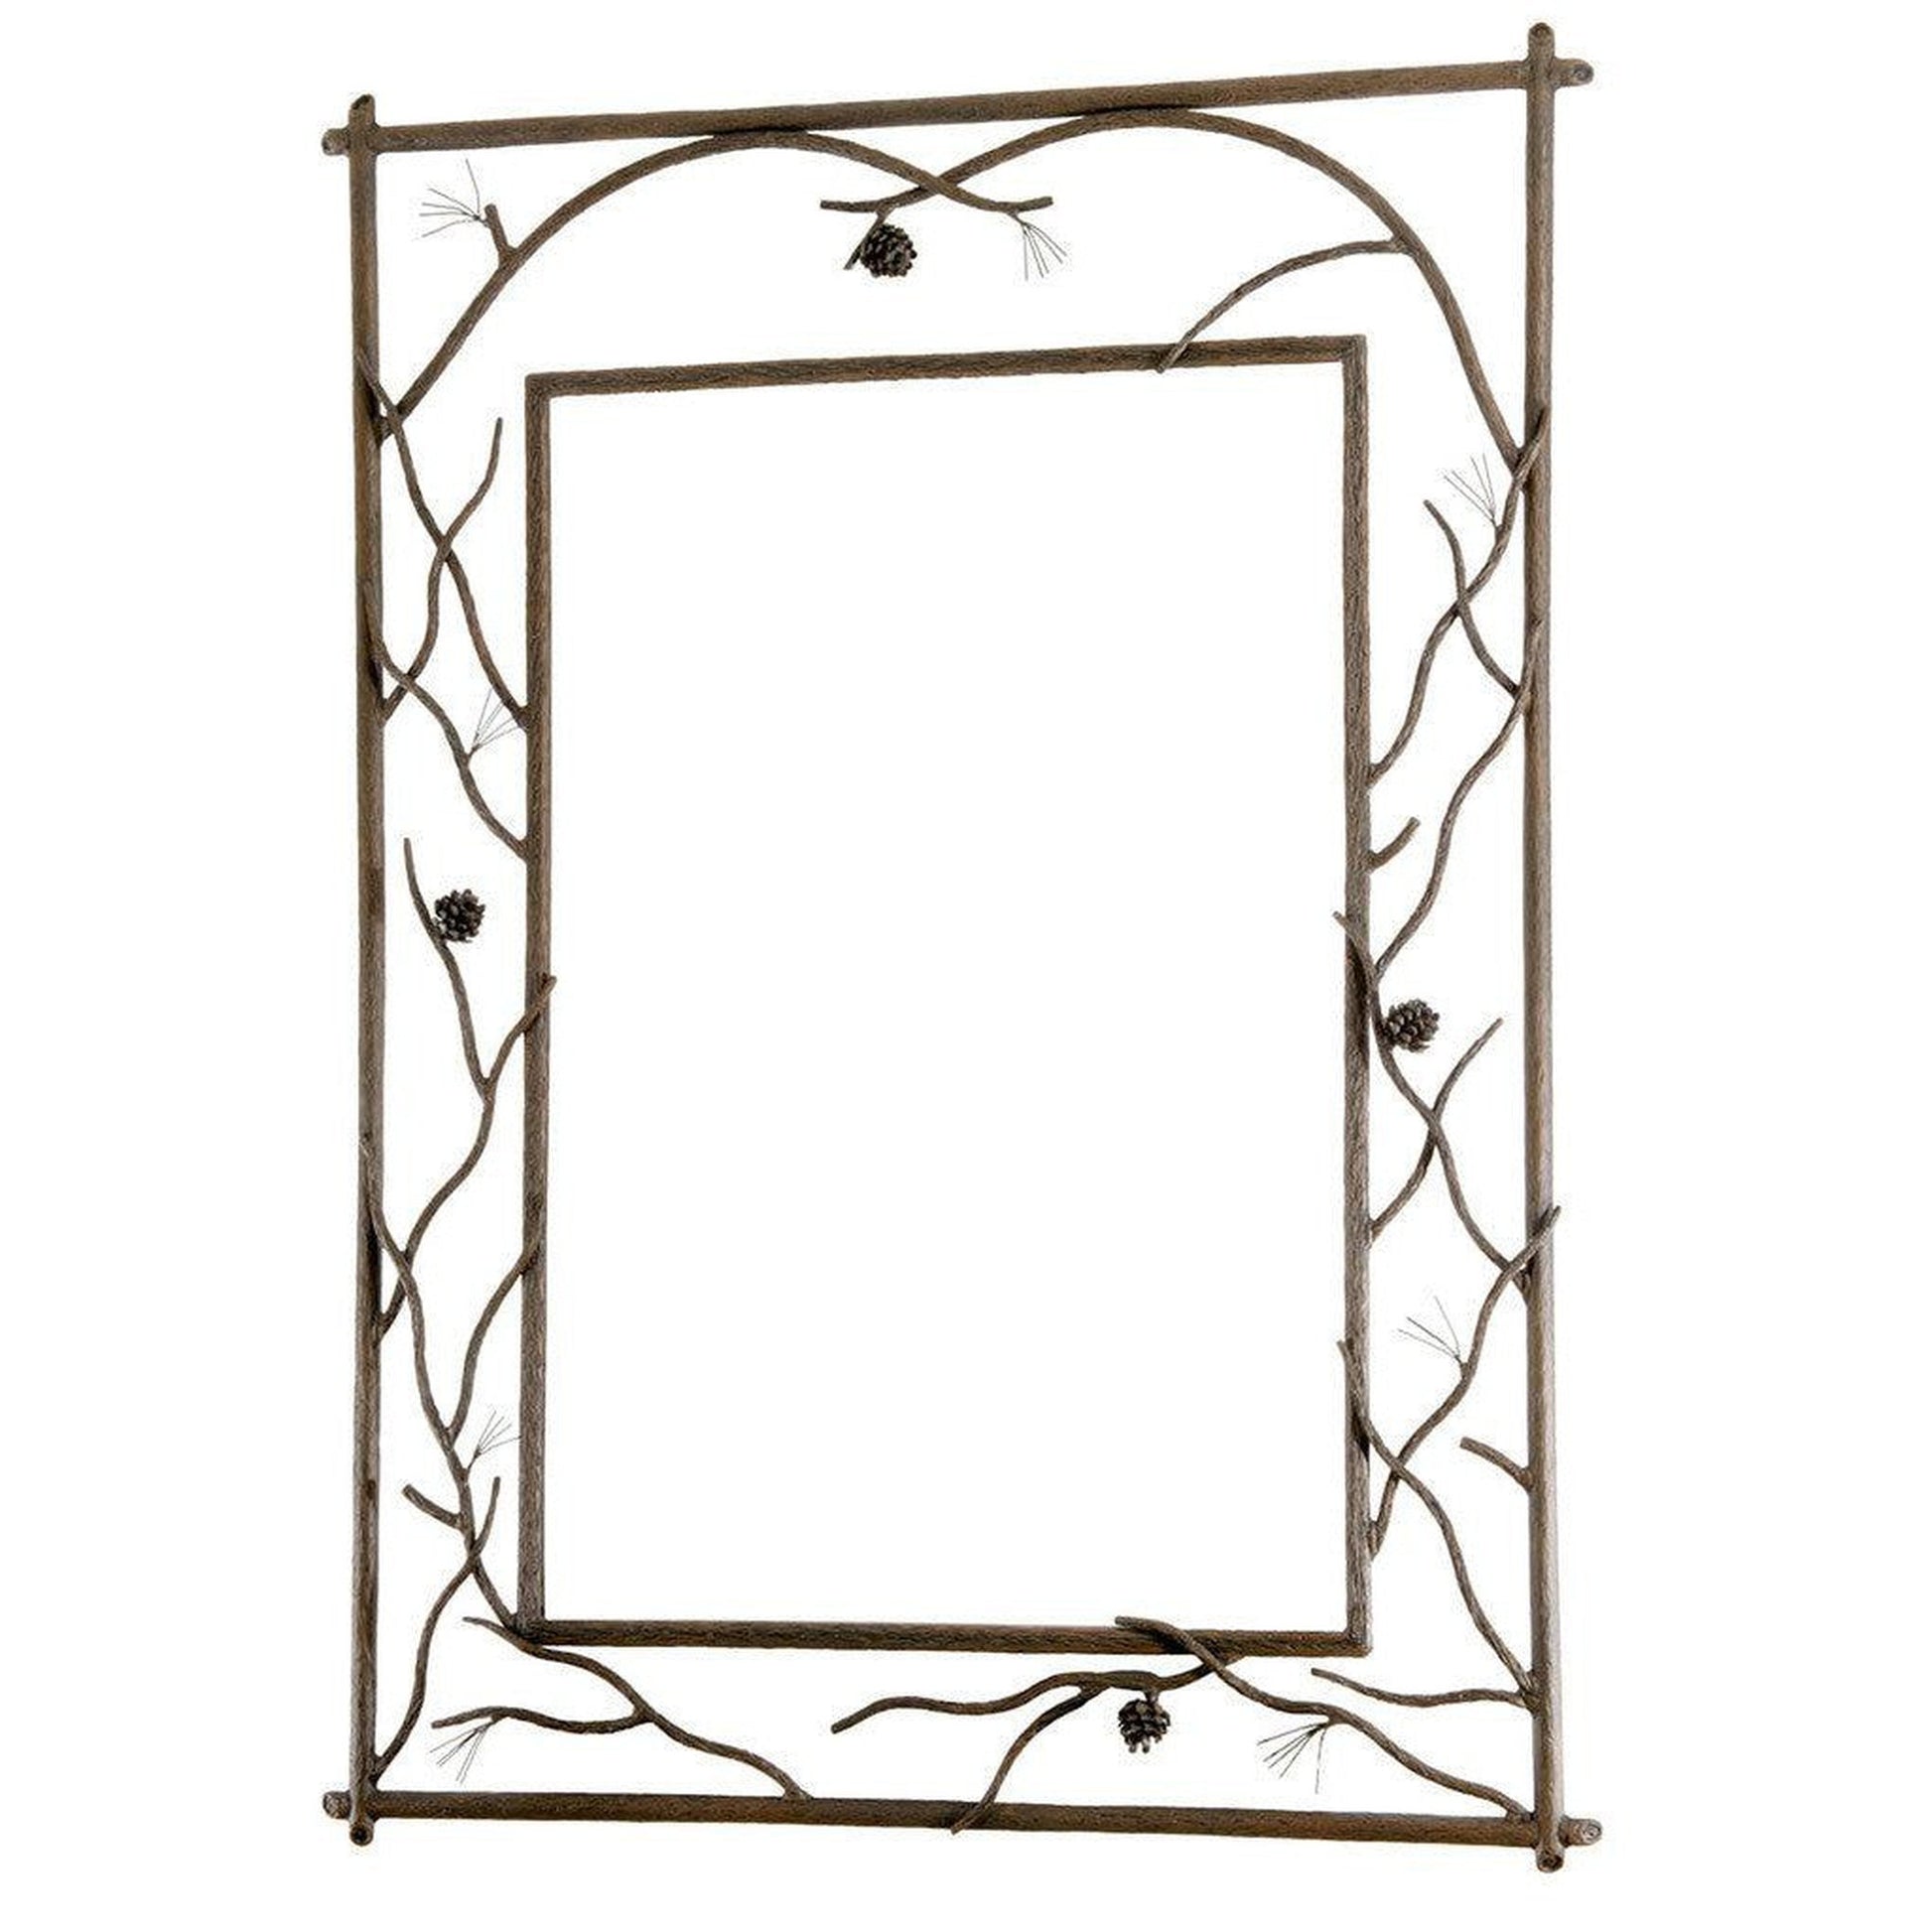 Stone County Ironworks Pine 29" x 35" Small Natural Black Branched Iron Wall Mirror With Pewter Iron Accent